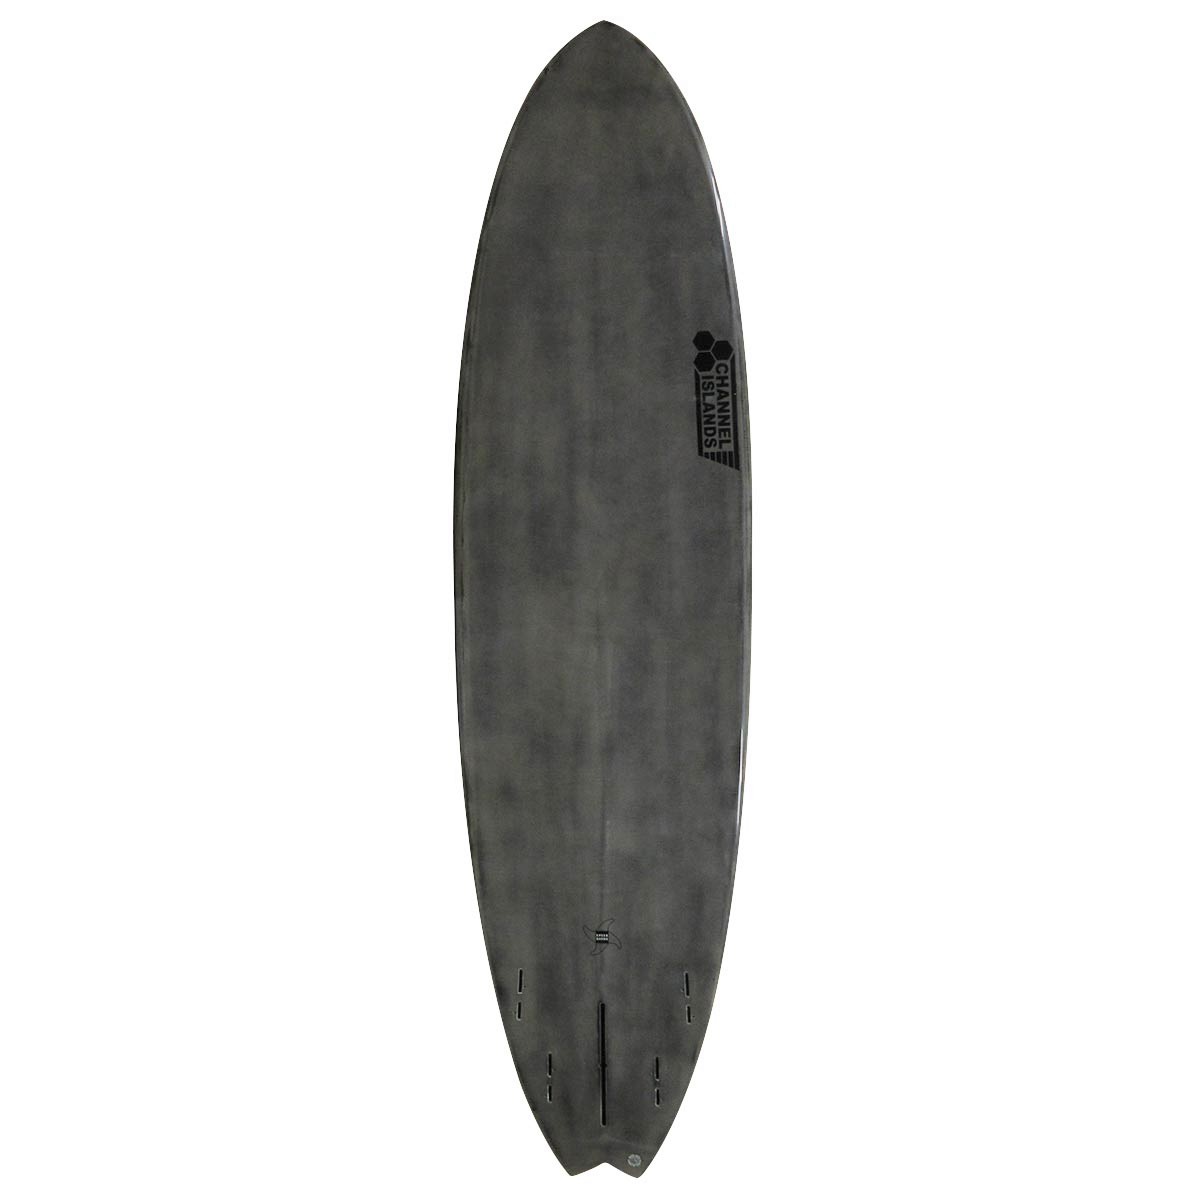 THUNDERBOLT x CHANNEL ISLANDS : CI MID 7'2"Speed Quong CARBON TEXA